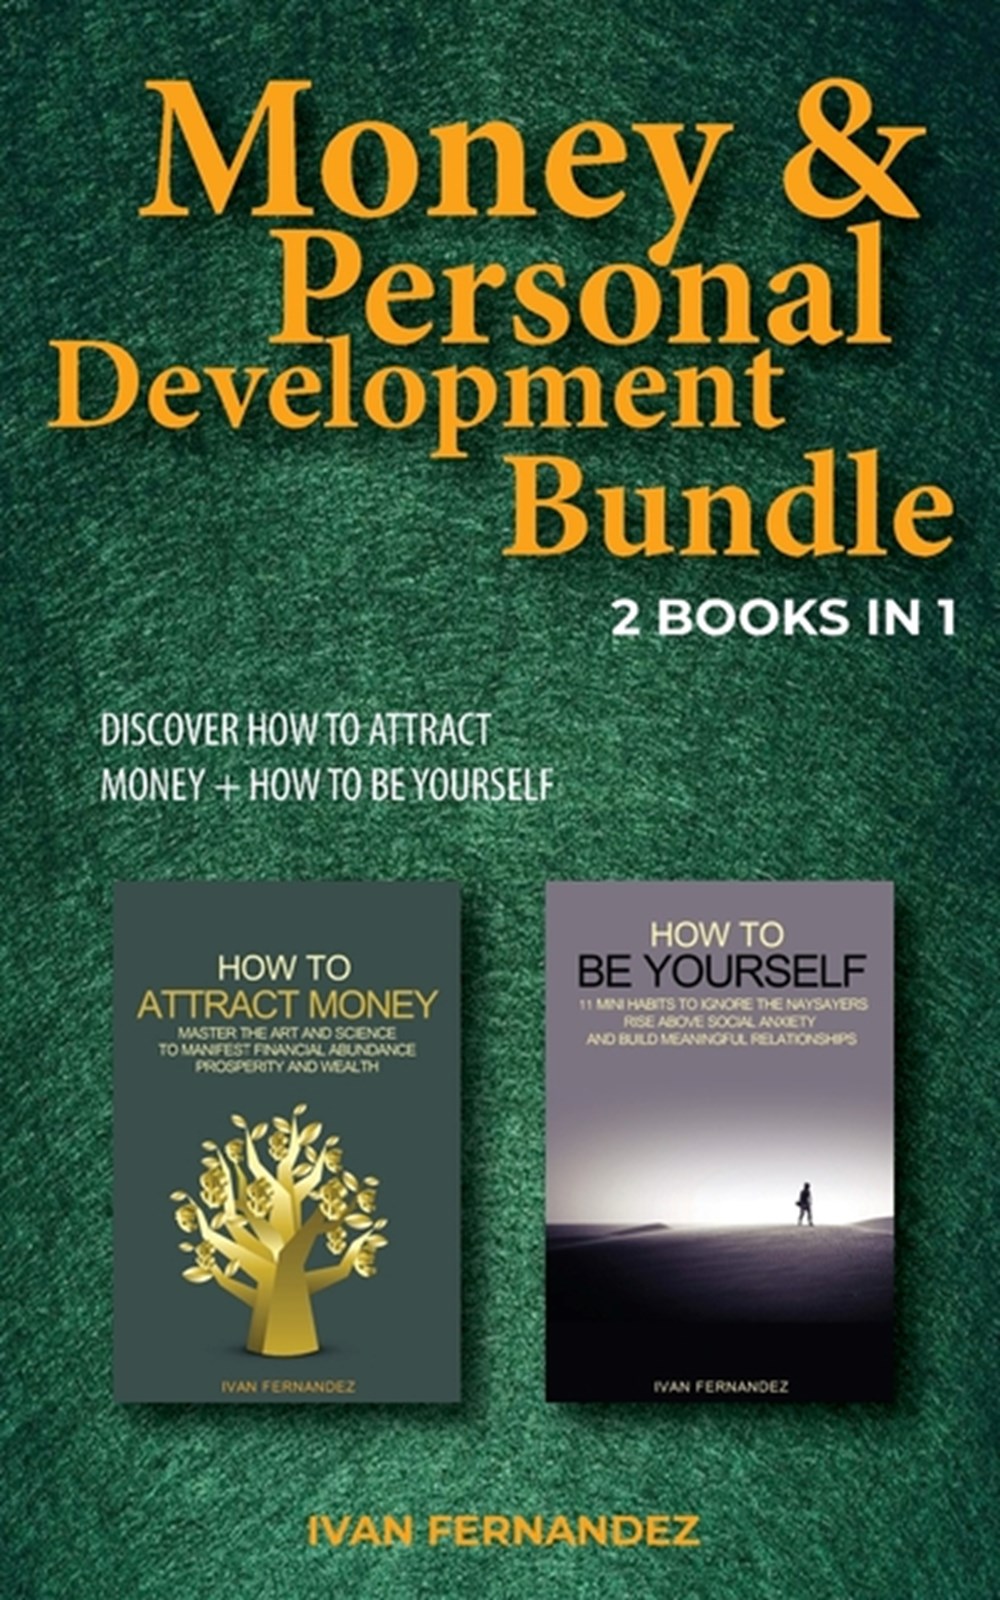 Money & Personal Development Bundle 2 Books in 1: Discover How to Attract Money + How to Be Yourself